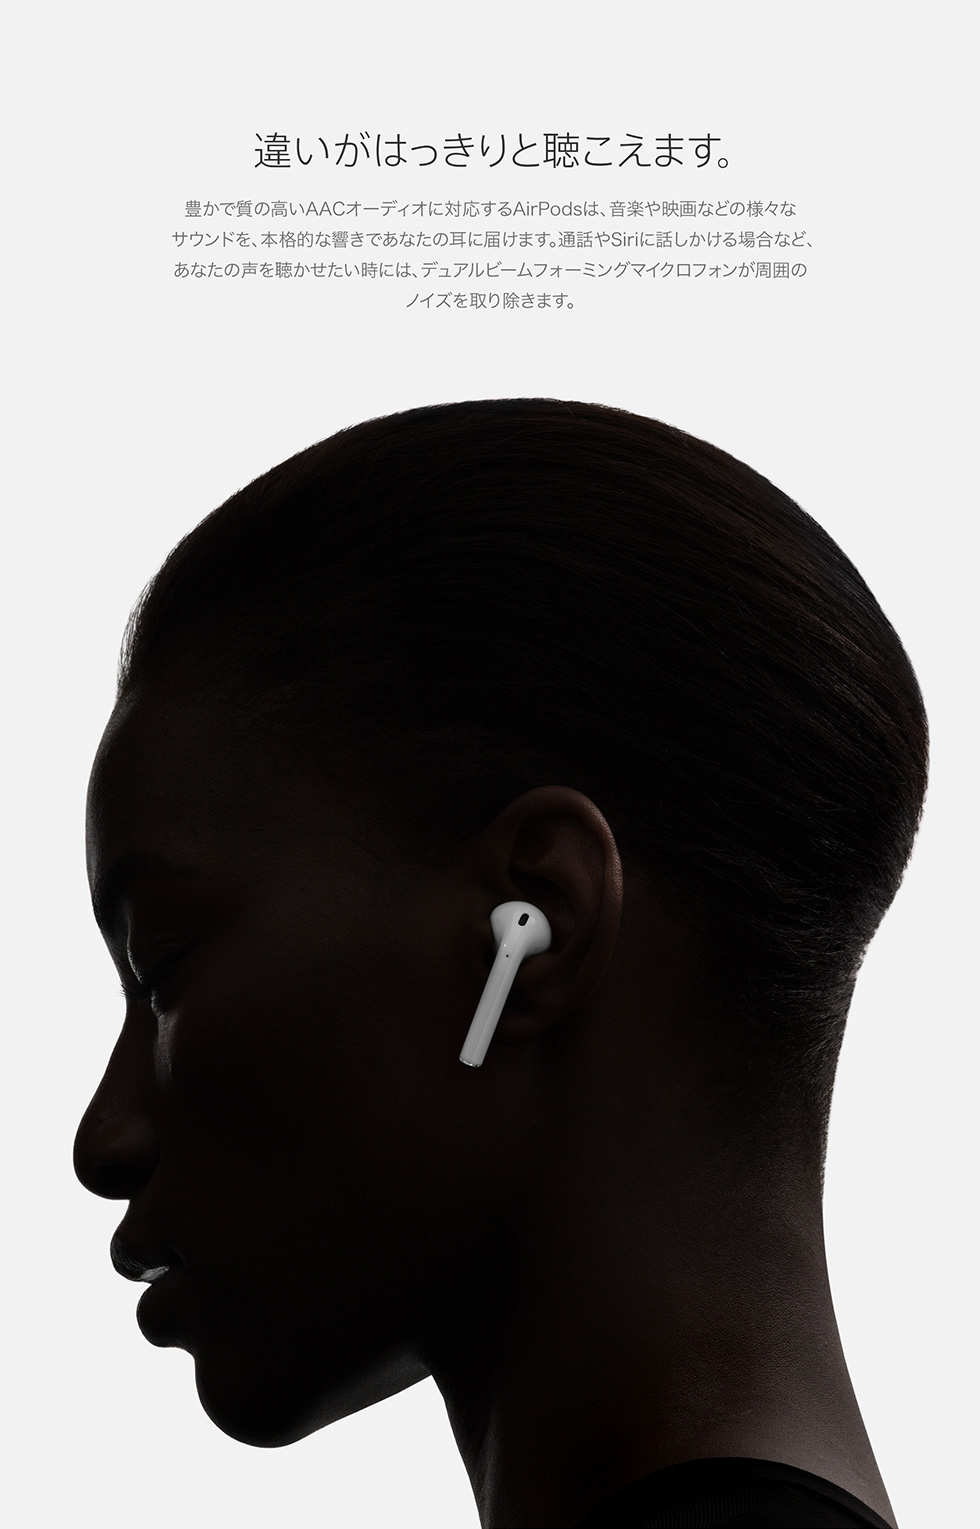 AirPods(第2代)